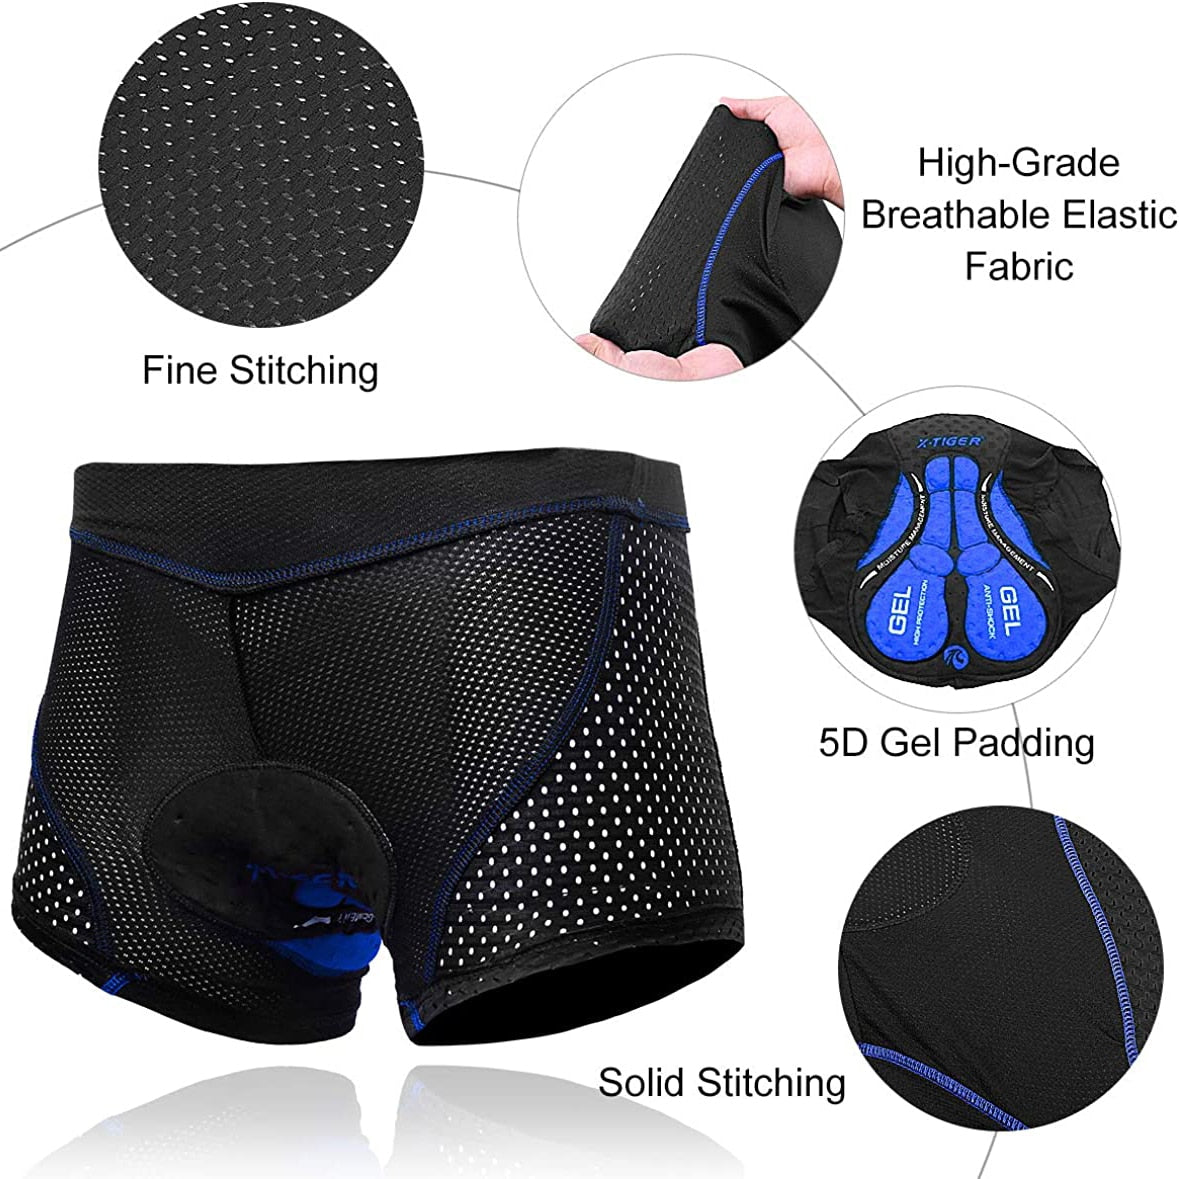 X-Tiger Cycling Underwear Pro 5D Gel Pad/Shockproof Cycling Underpant Upgrade Padded